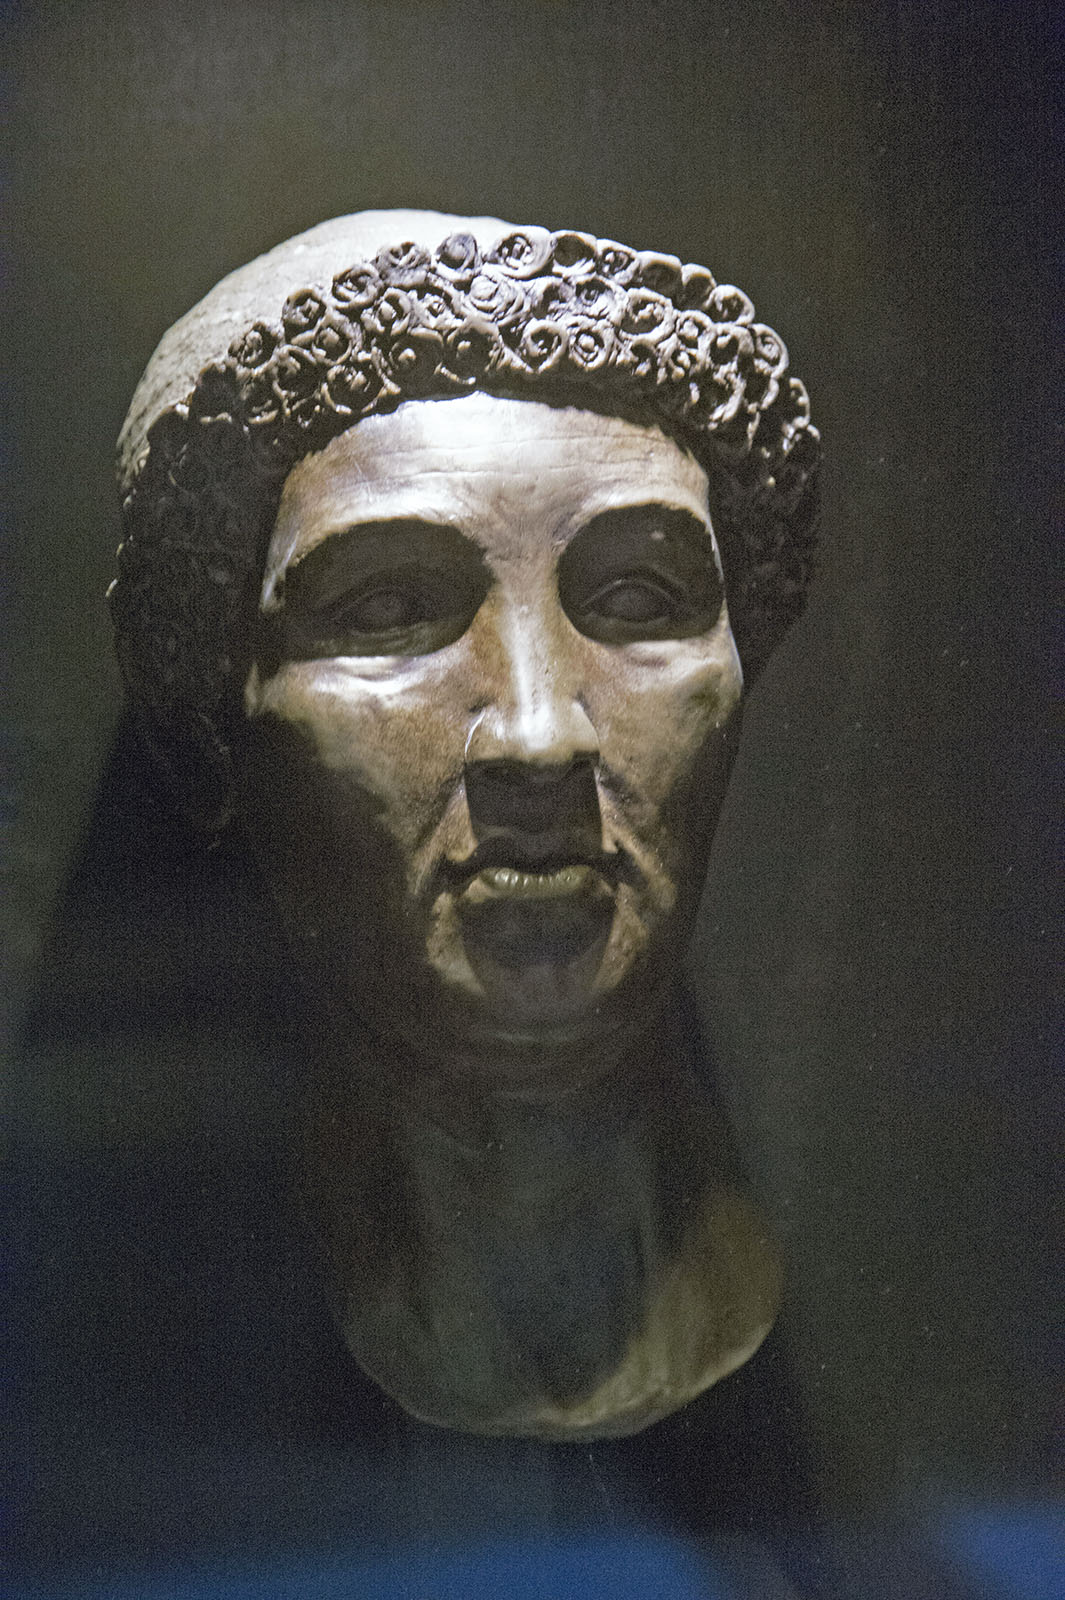 Sculptured head of a mature woman, with a strong face, and elaborate hairstyle